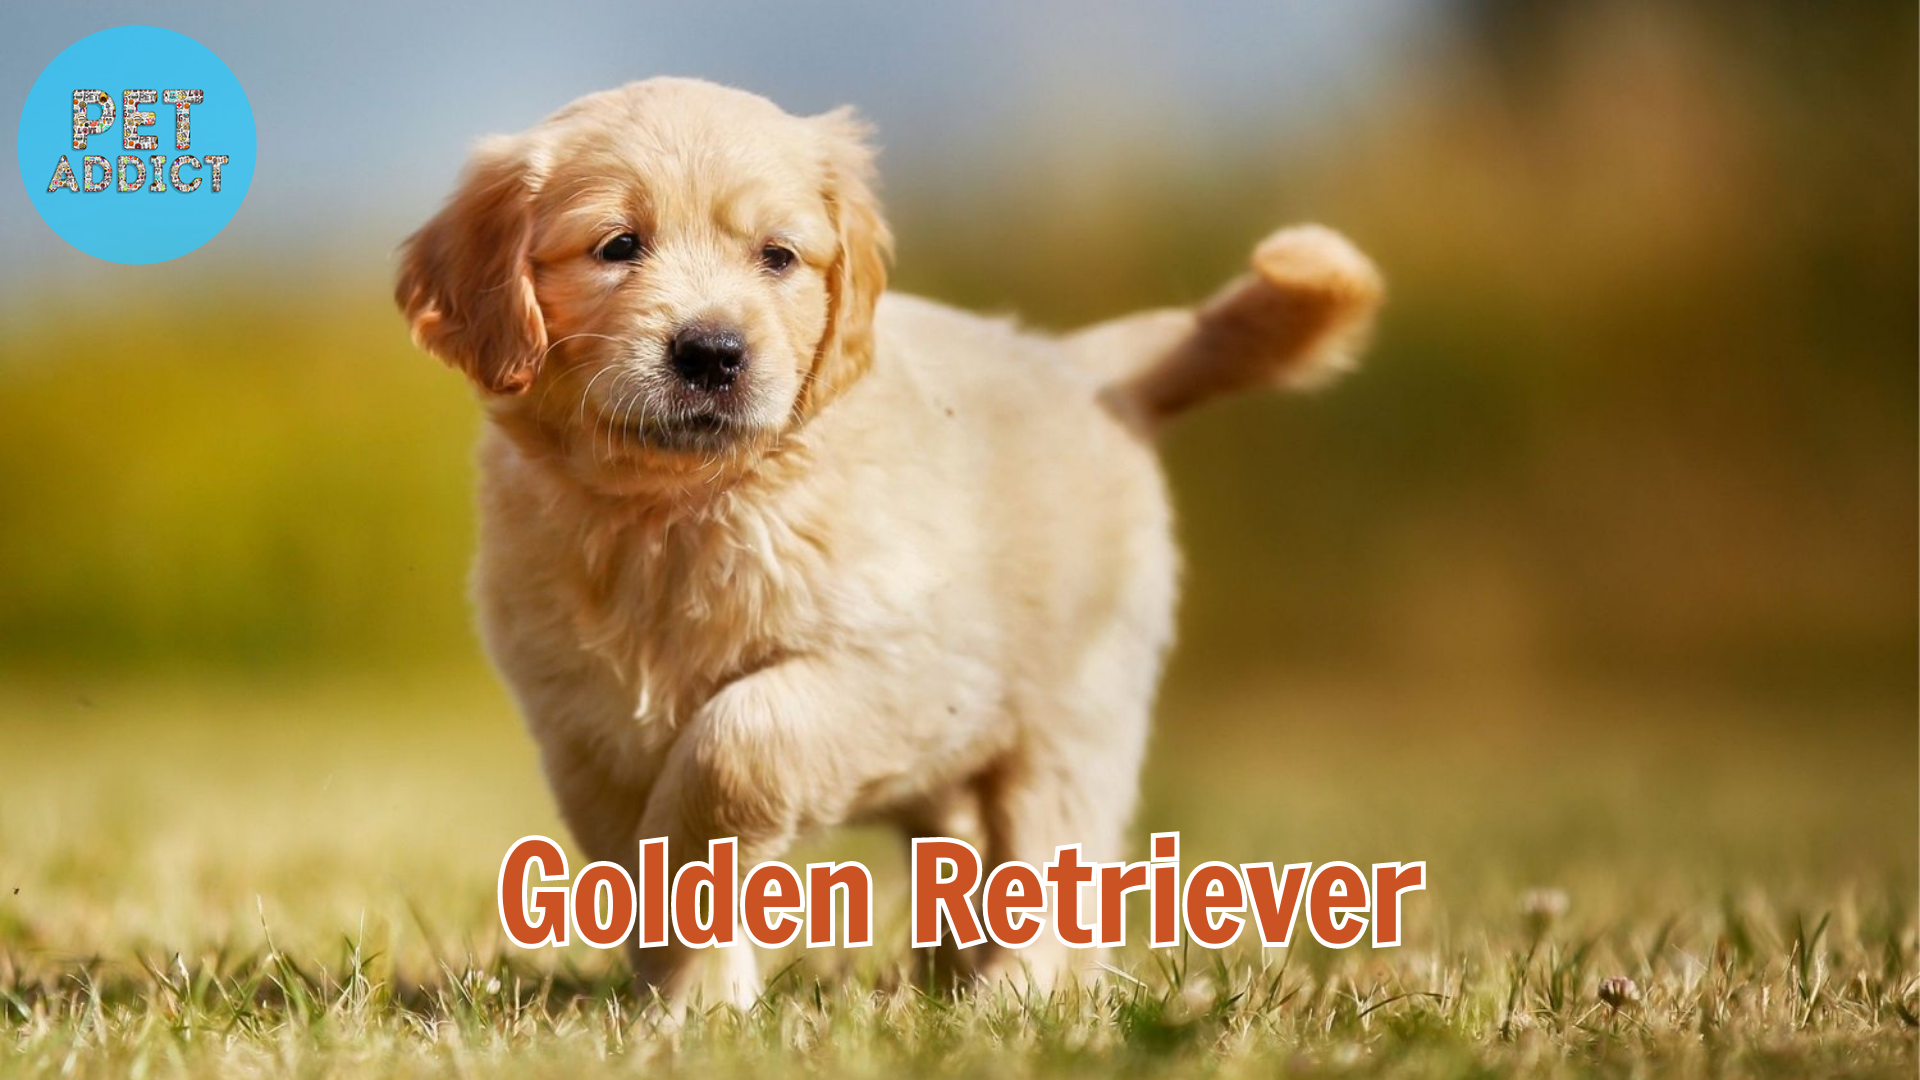 The Lovable Gold Dog: All About Golden Retrievers